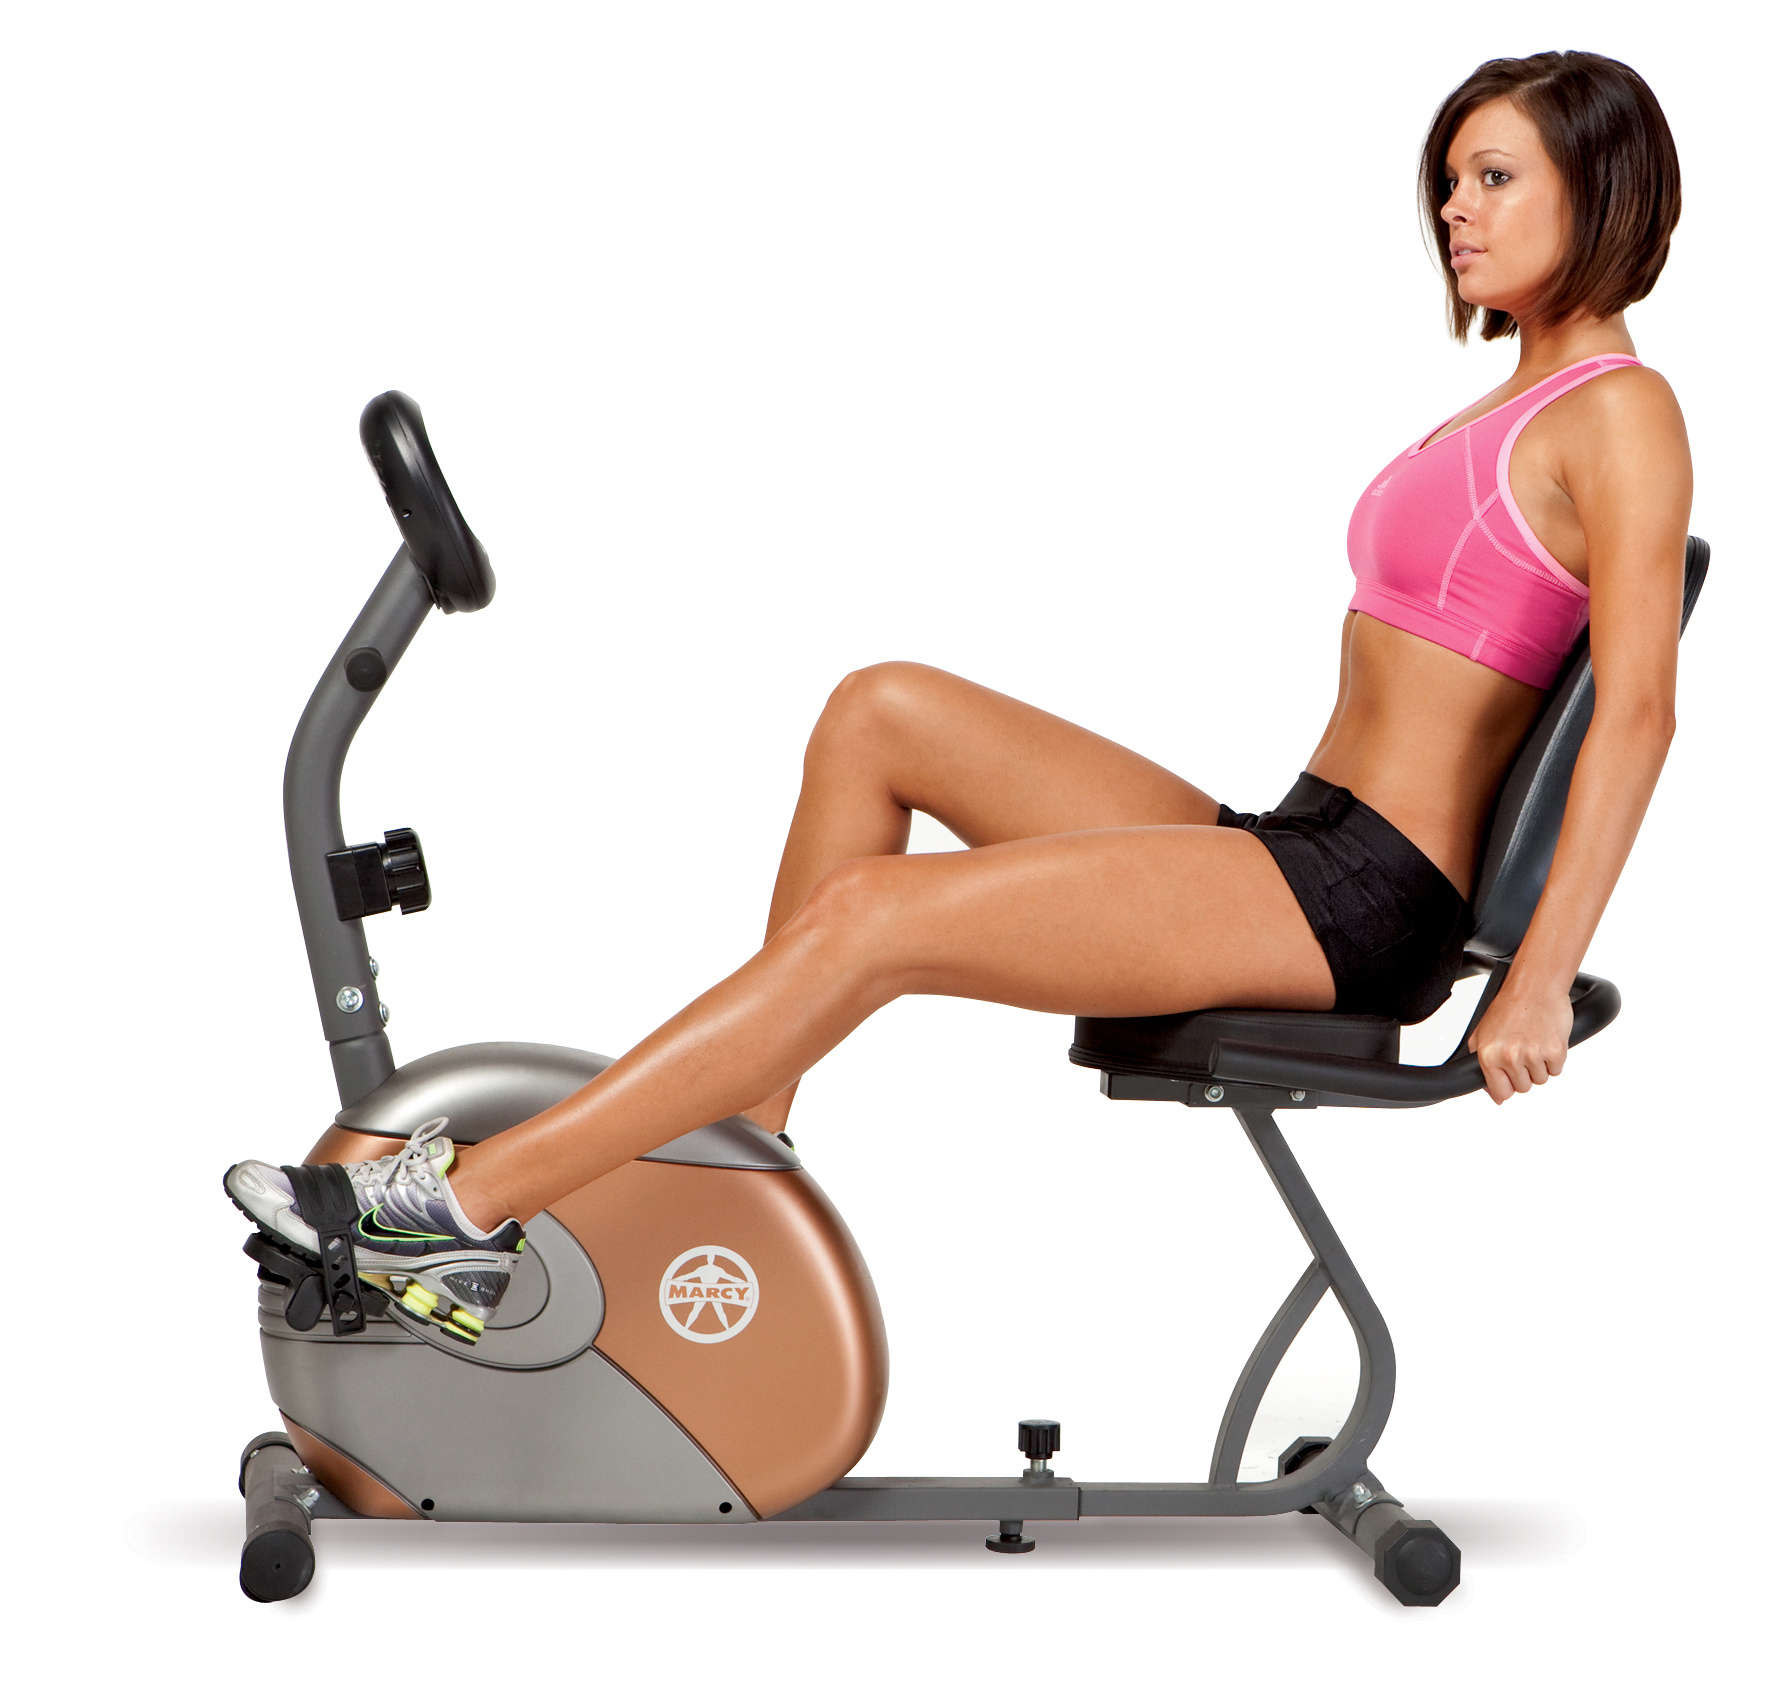 Marcy ME709 Recumbent Magnetic Exercise Bike Cycling Home Gym Equipment - image 4 of 5